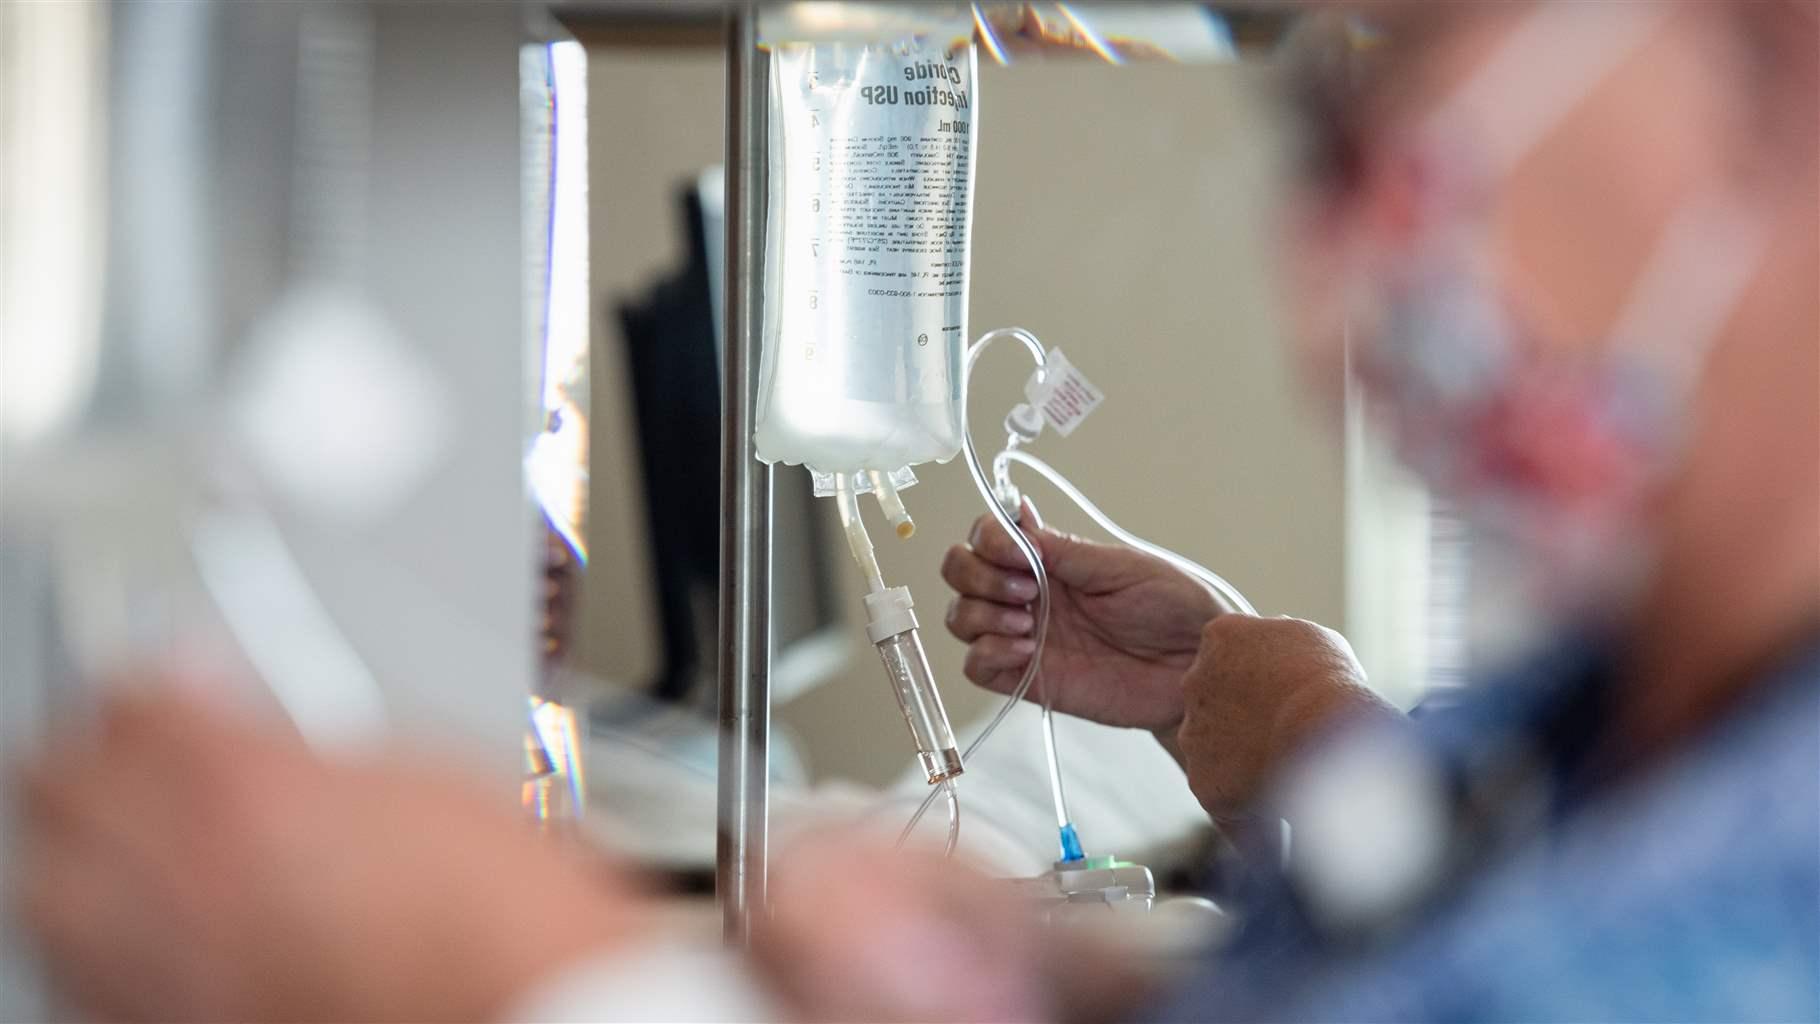 Charlotte Welborn, a registered nurse, administers intravenous antibiotics to a patient in the medical, surgical and pediatric unit at Randolph Health in Asheboro, North Carolina on Tuesday, June 7, 2022.